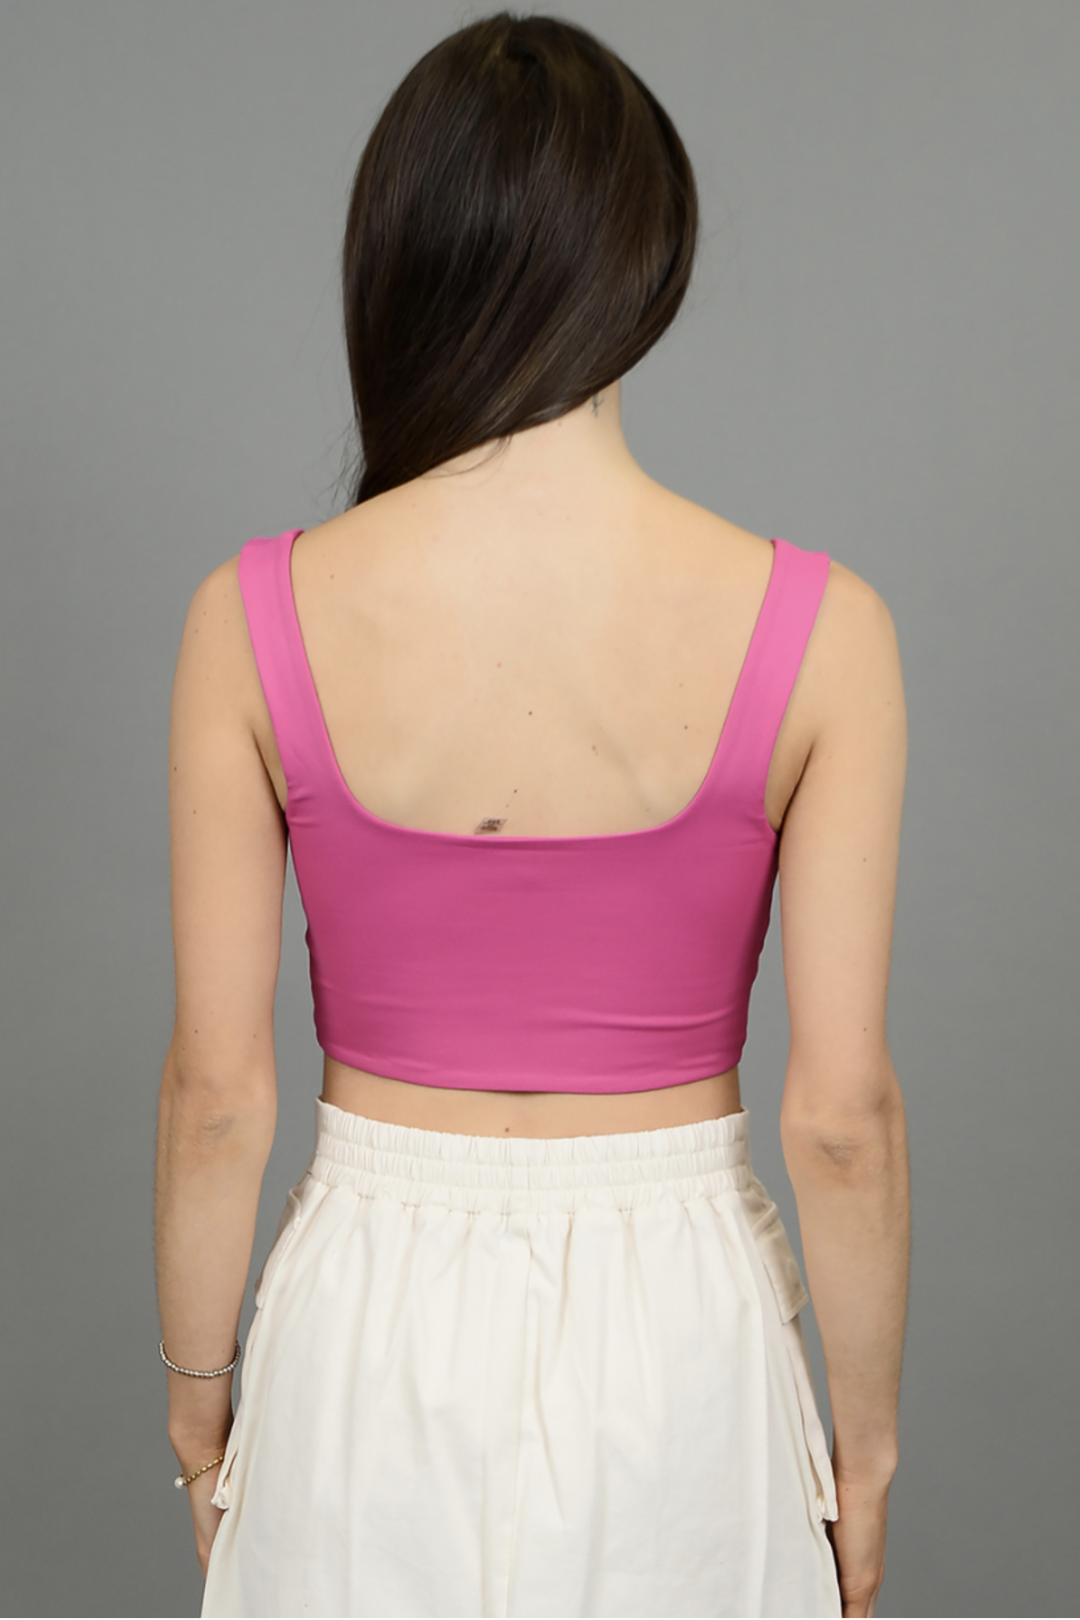 The "Catherine" Second Skin Crop Top